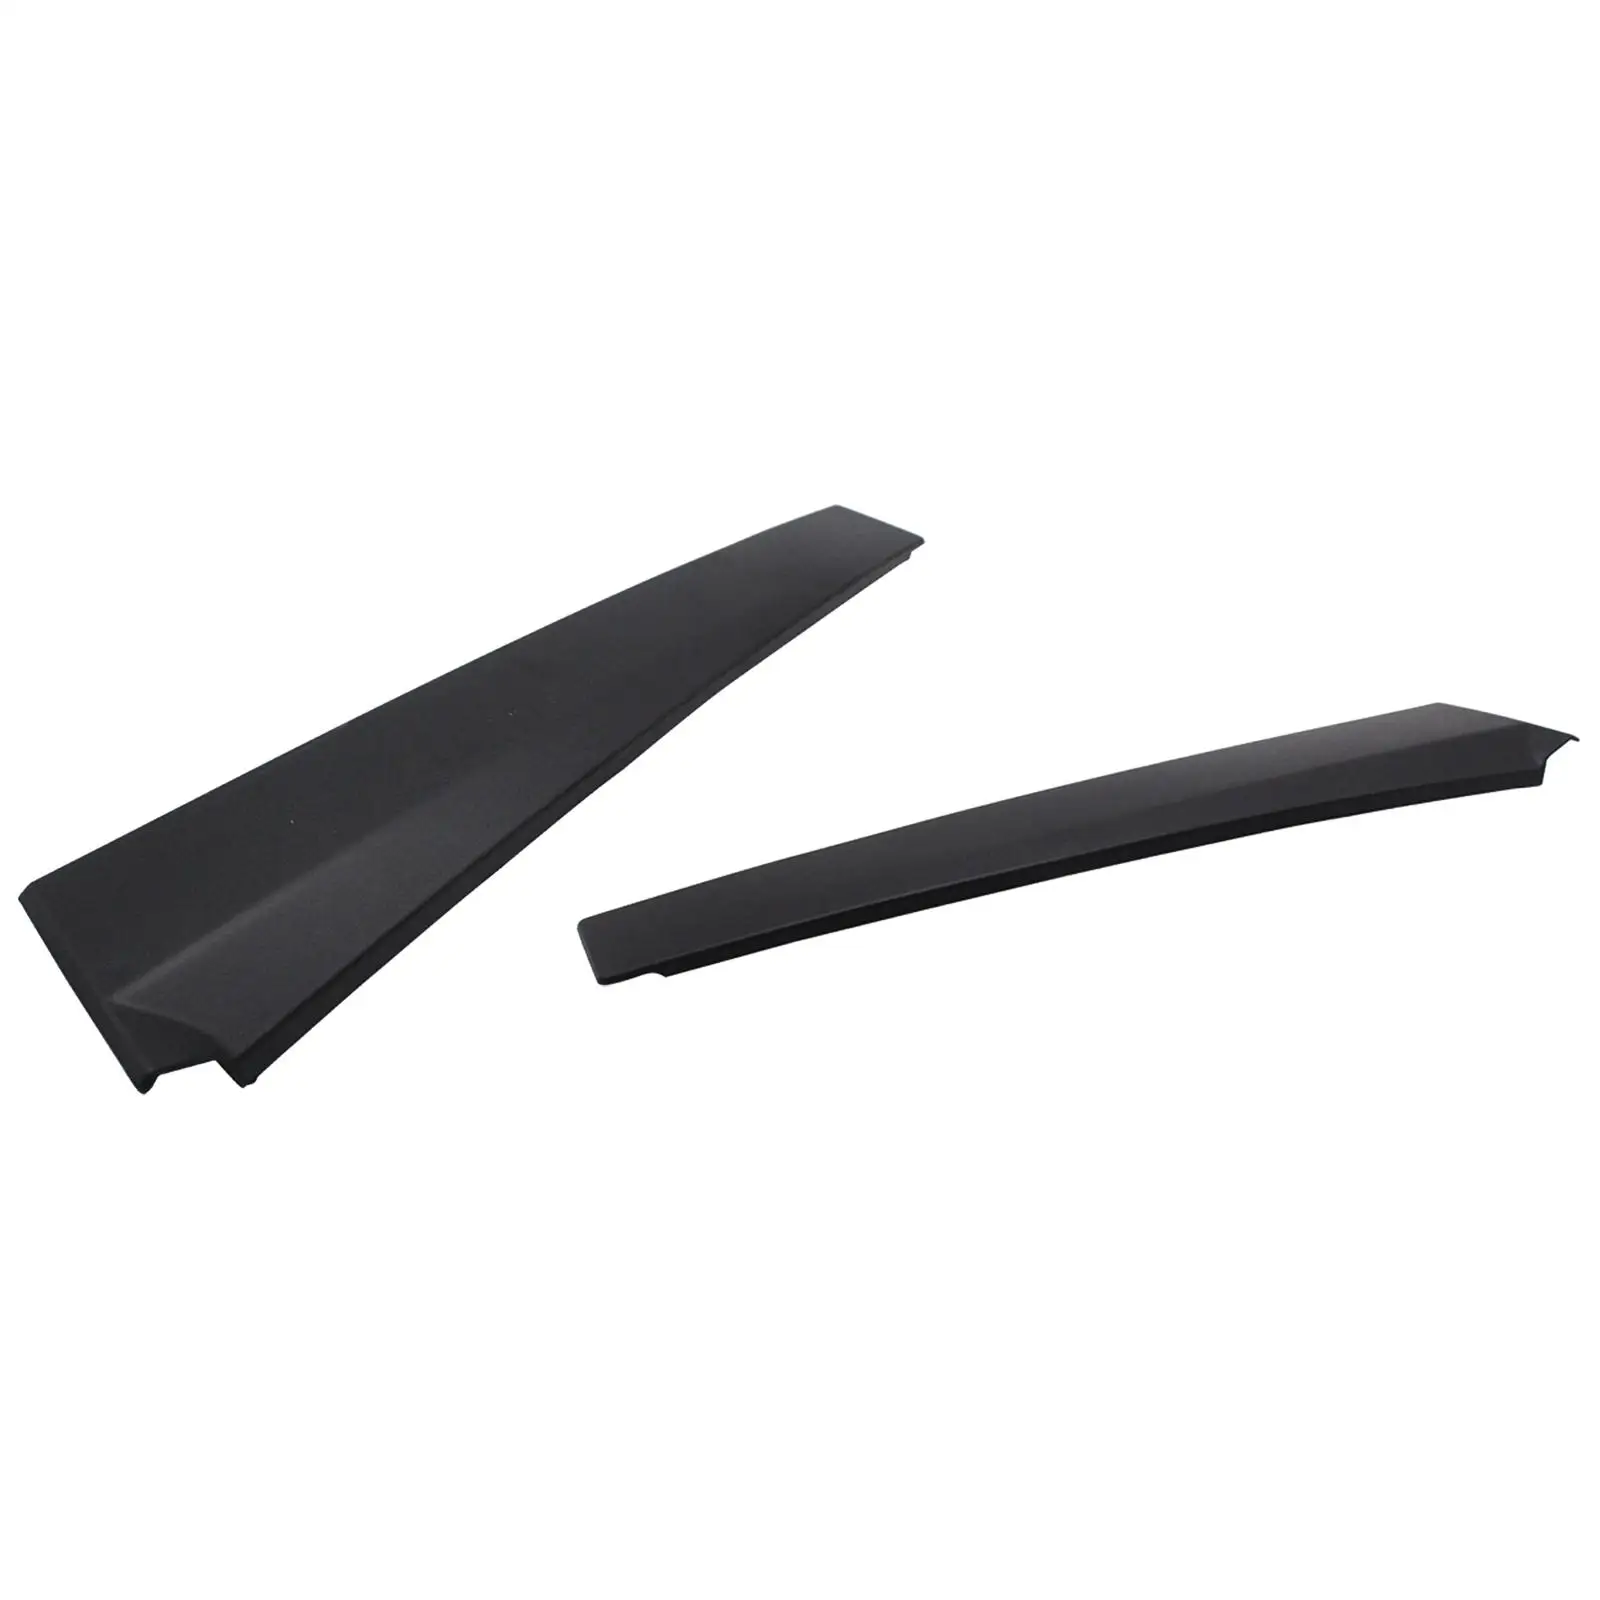 Auto Door Pillar Trim Moulding 1473662 2S51B20898Ag 2S51 B20898Ag for Ford Fiesta MK6 3 Door Replace Parts Durable